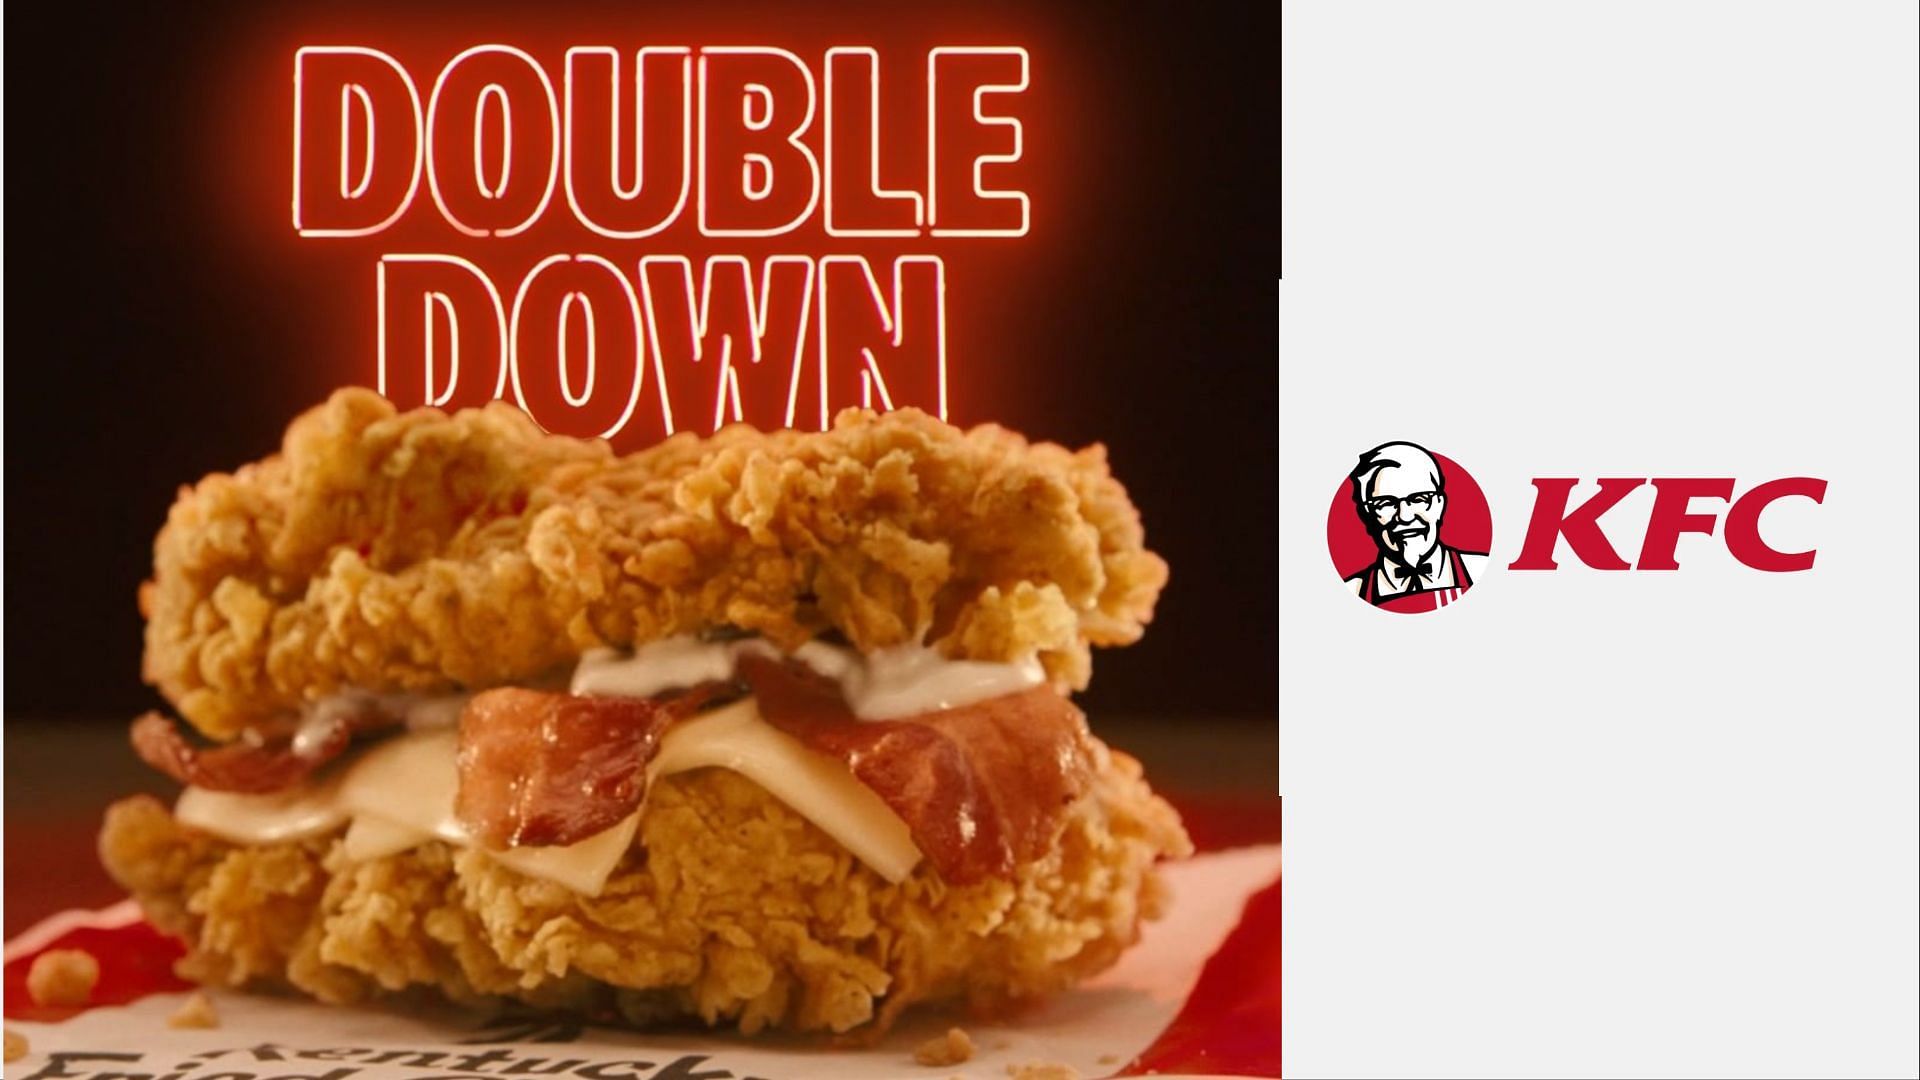 "A great day for cardiologists" KFC double down nutrition and calories